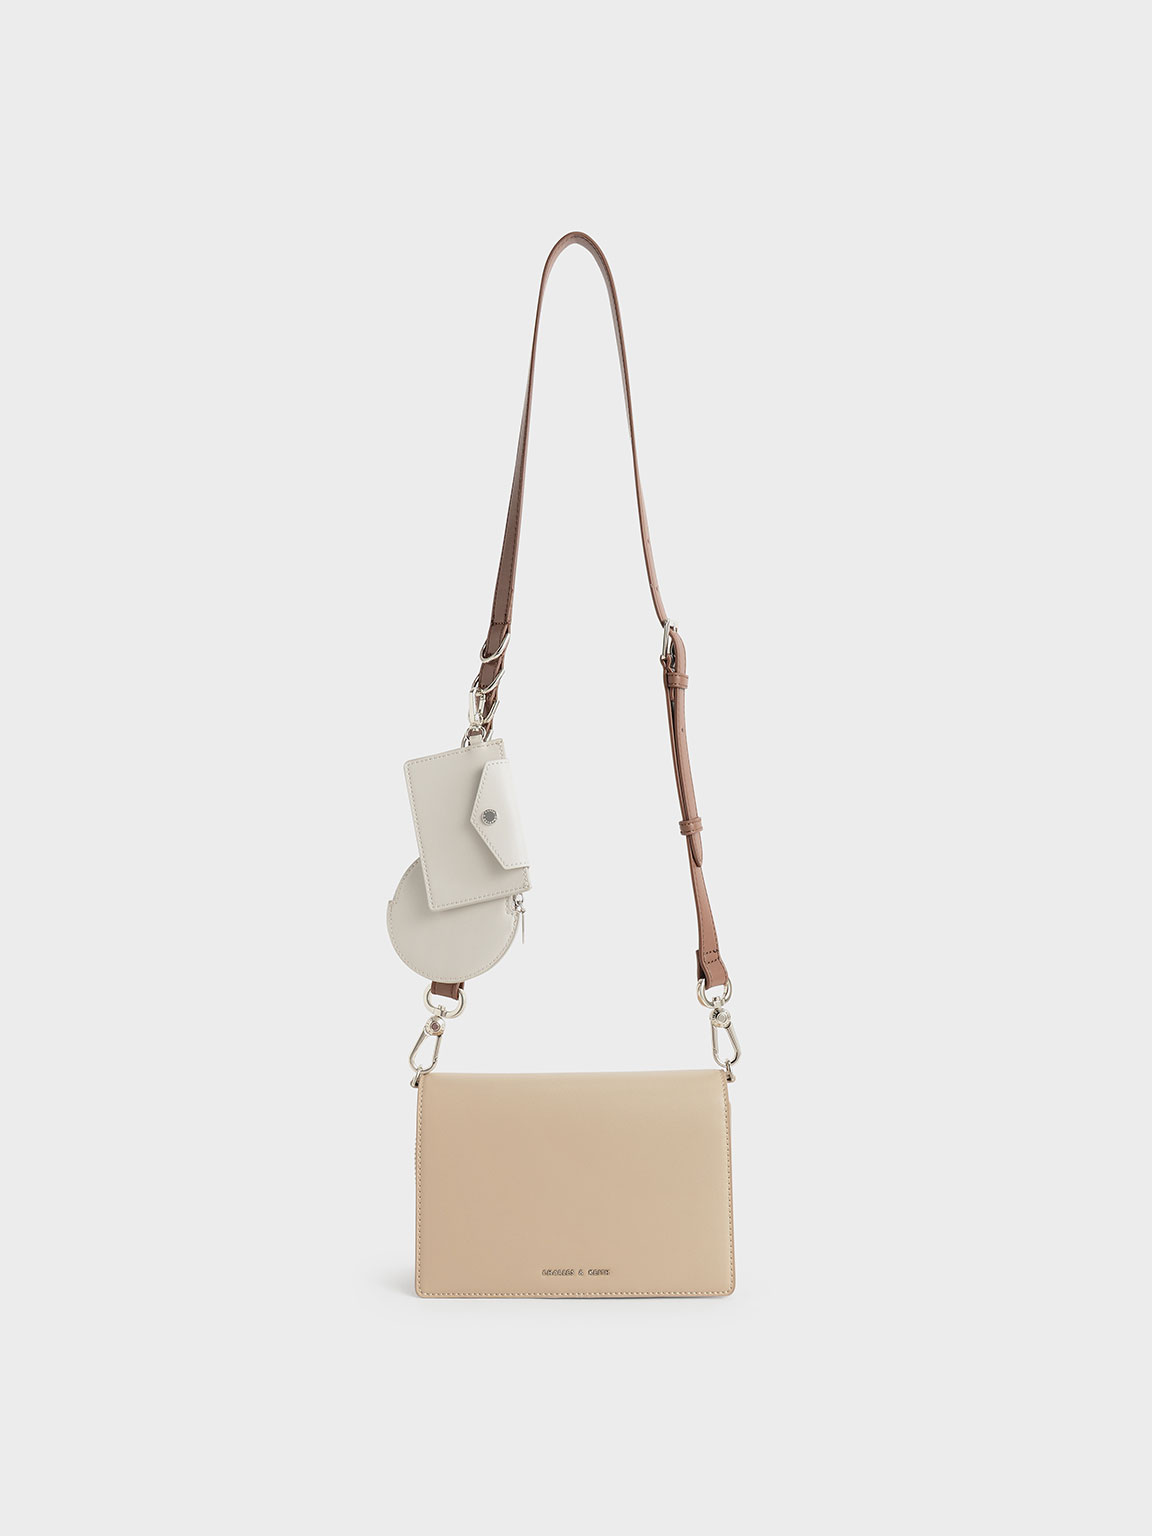 CHARLES & KEITH Crossbody Bags & Handbags for Women for sale